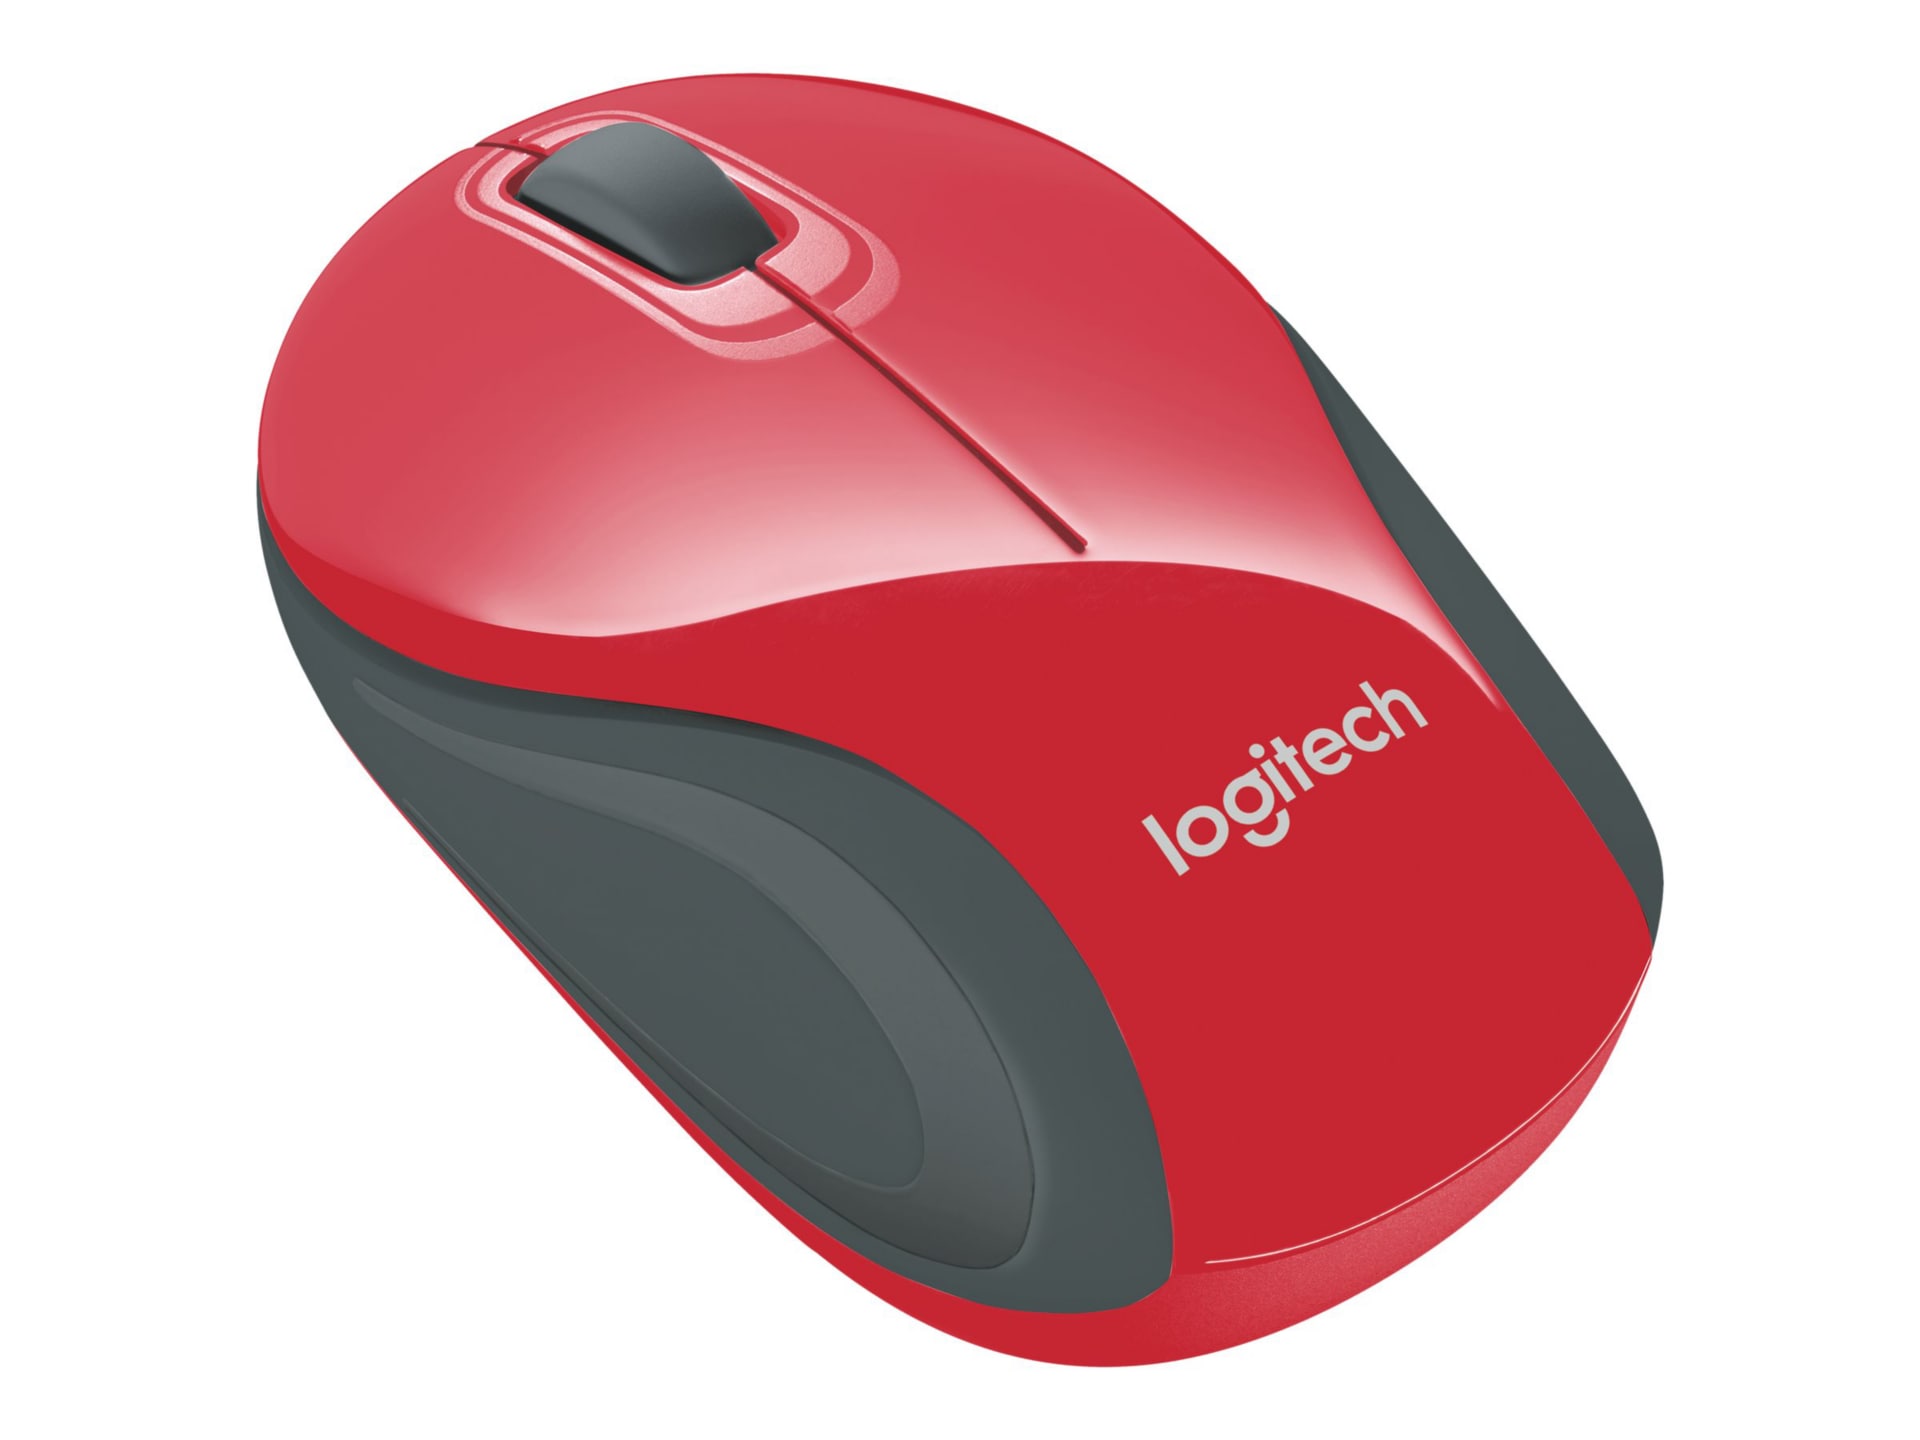 Logitech M187 910-002727 Mice - - 2.4 GHz red mouse - - 